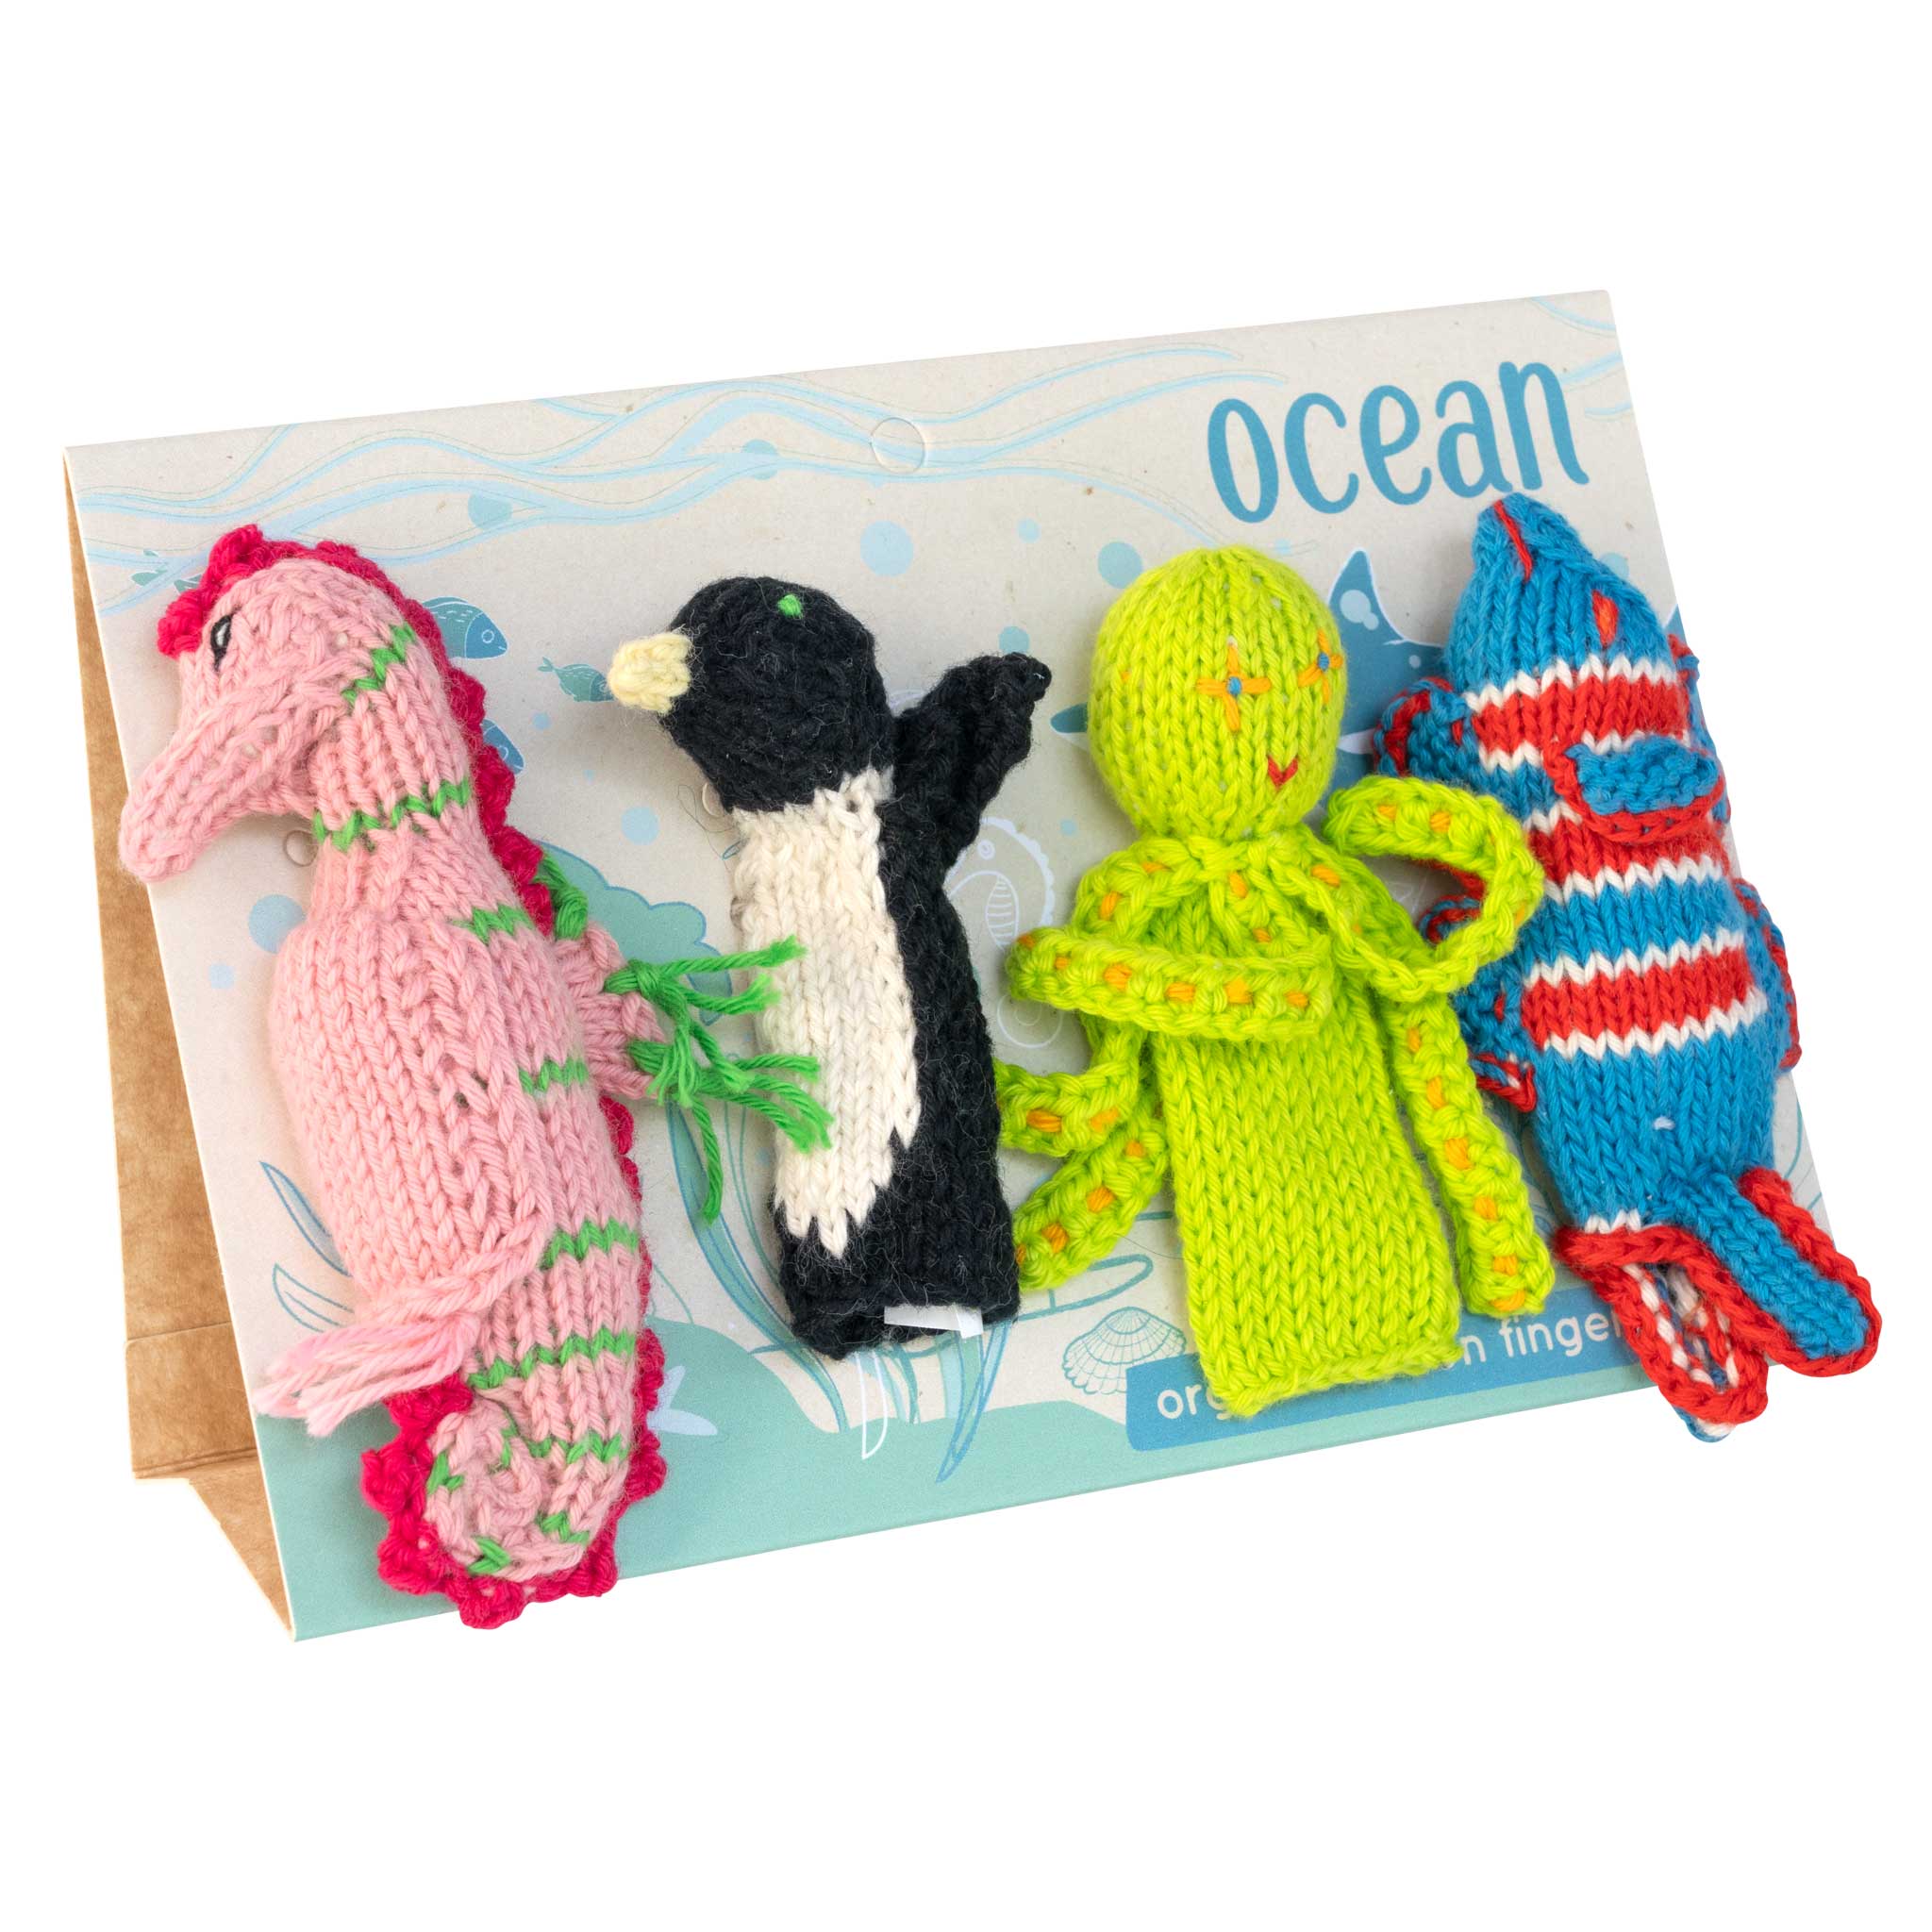 Ocean Story Pack of 4 - Organic Cotton Finger Puppets